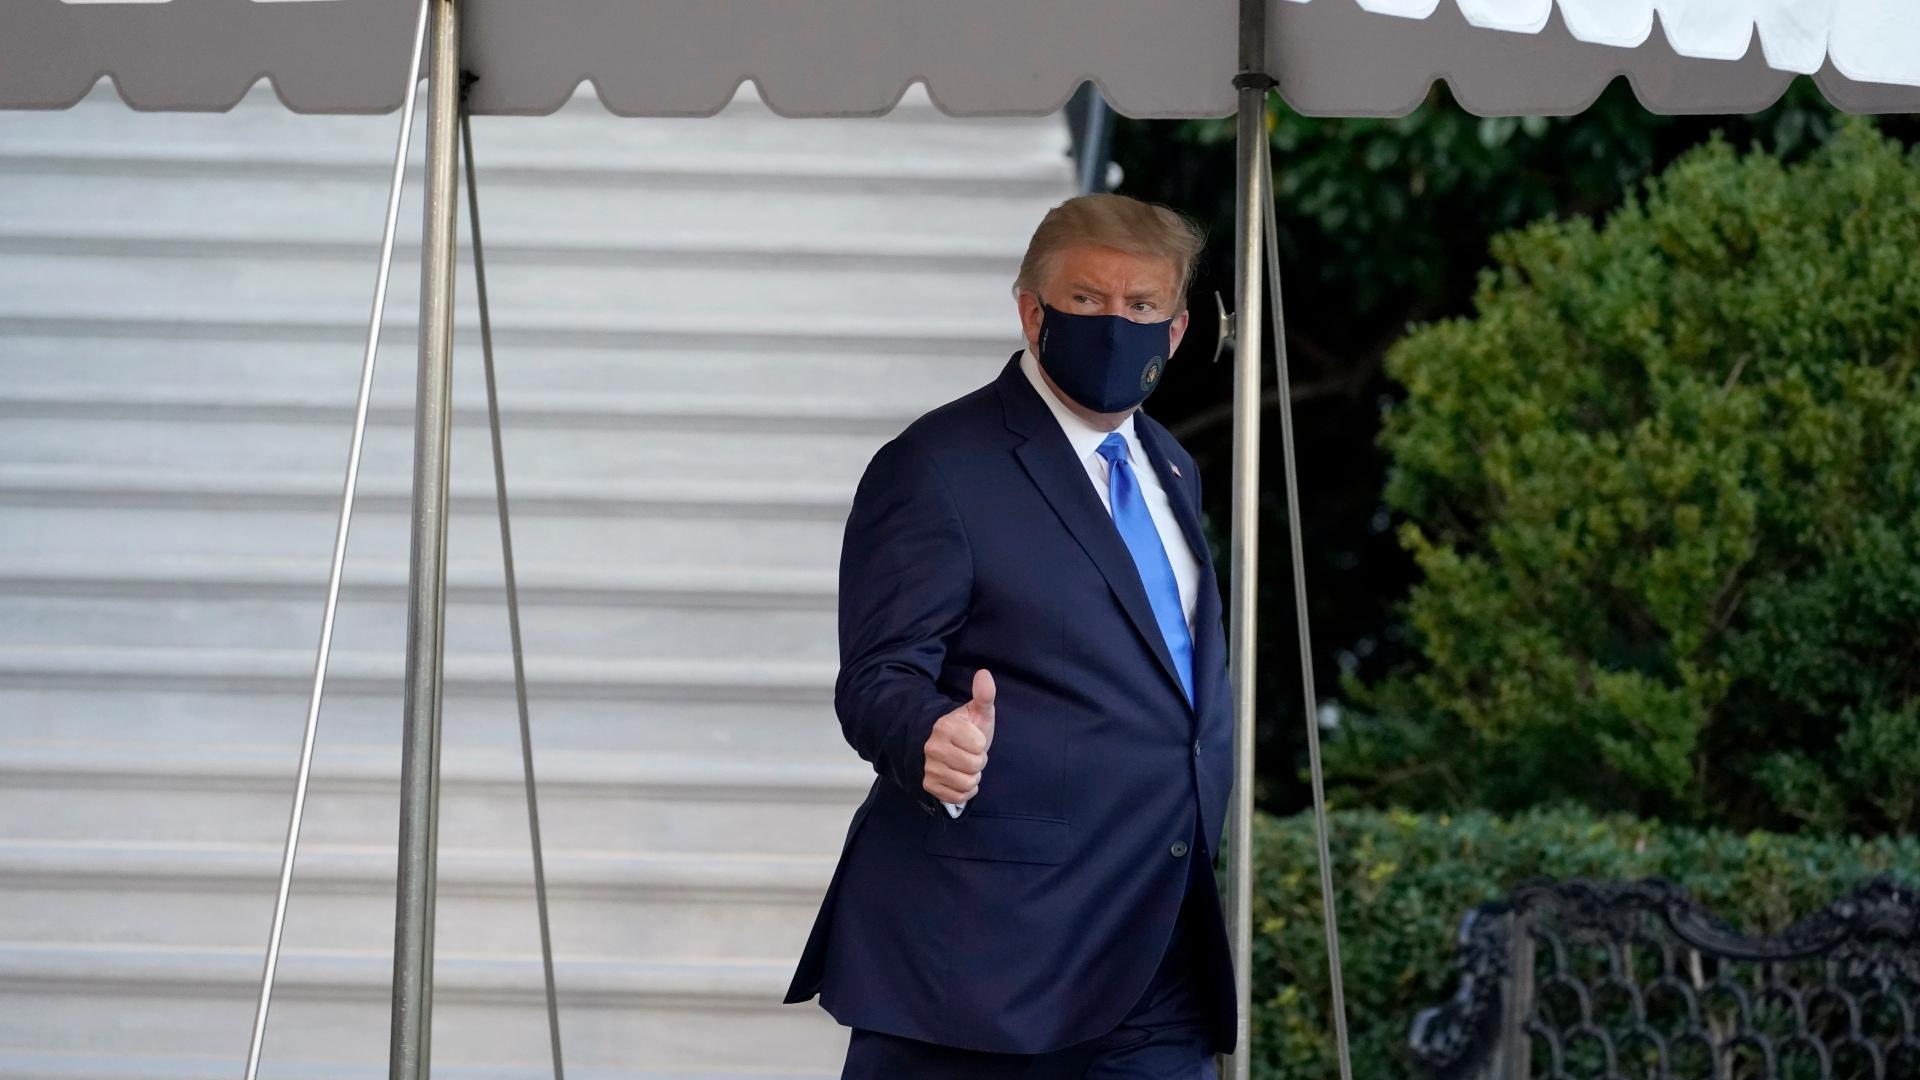 President Donald Trump gives a thumbs-up as he leaves the White House to go to Walter Reed National Military Medical Center after he tested positive for COVID-19, Friday, Oct. 2, 2020, in Washington. (AP Photo / Alex Brandon)